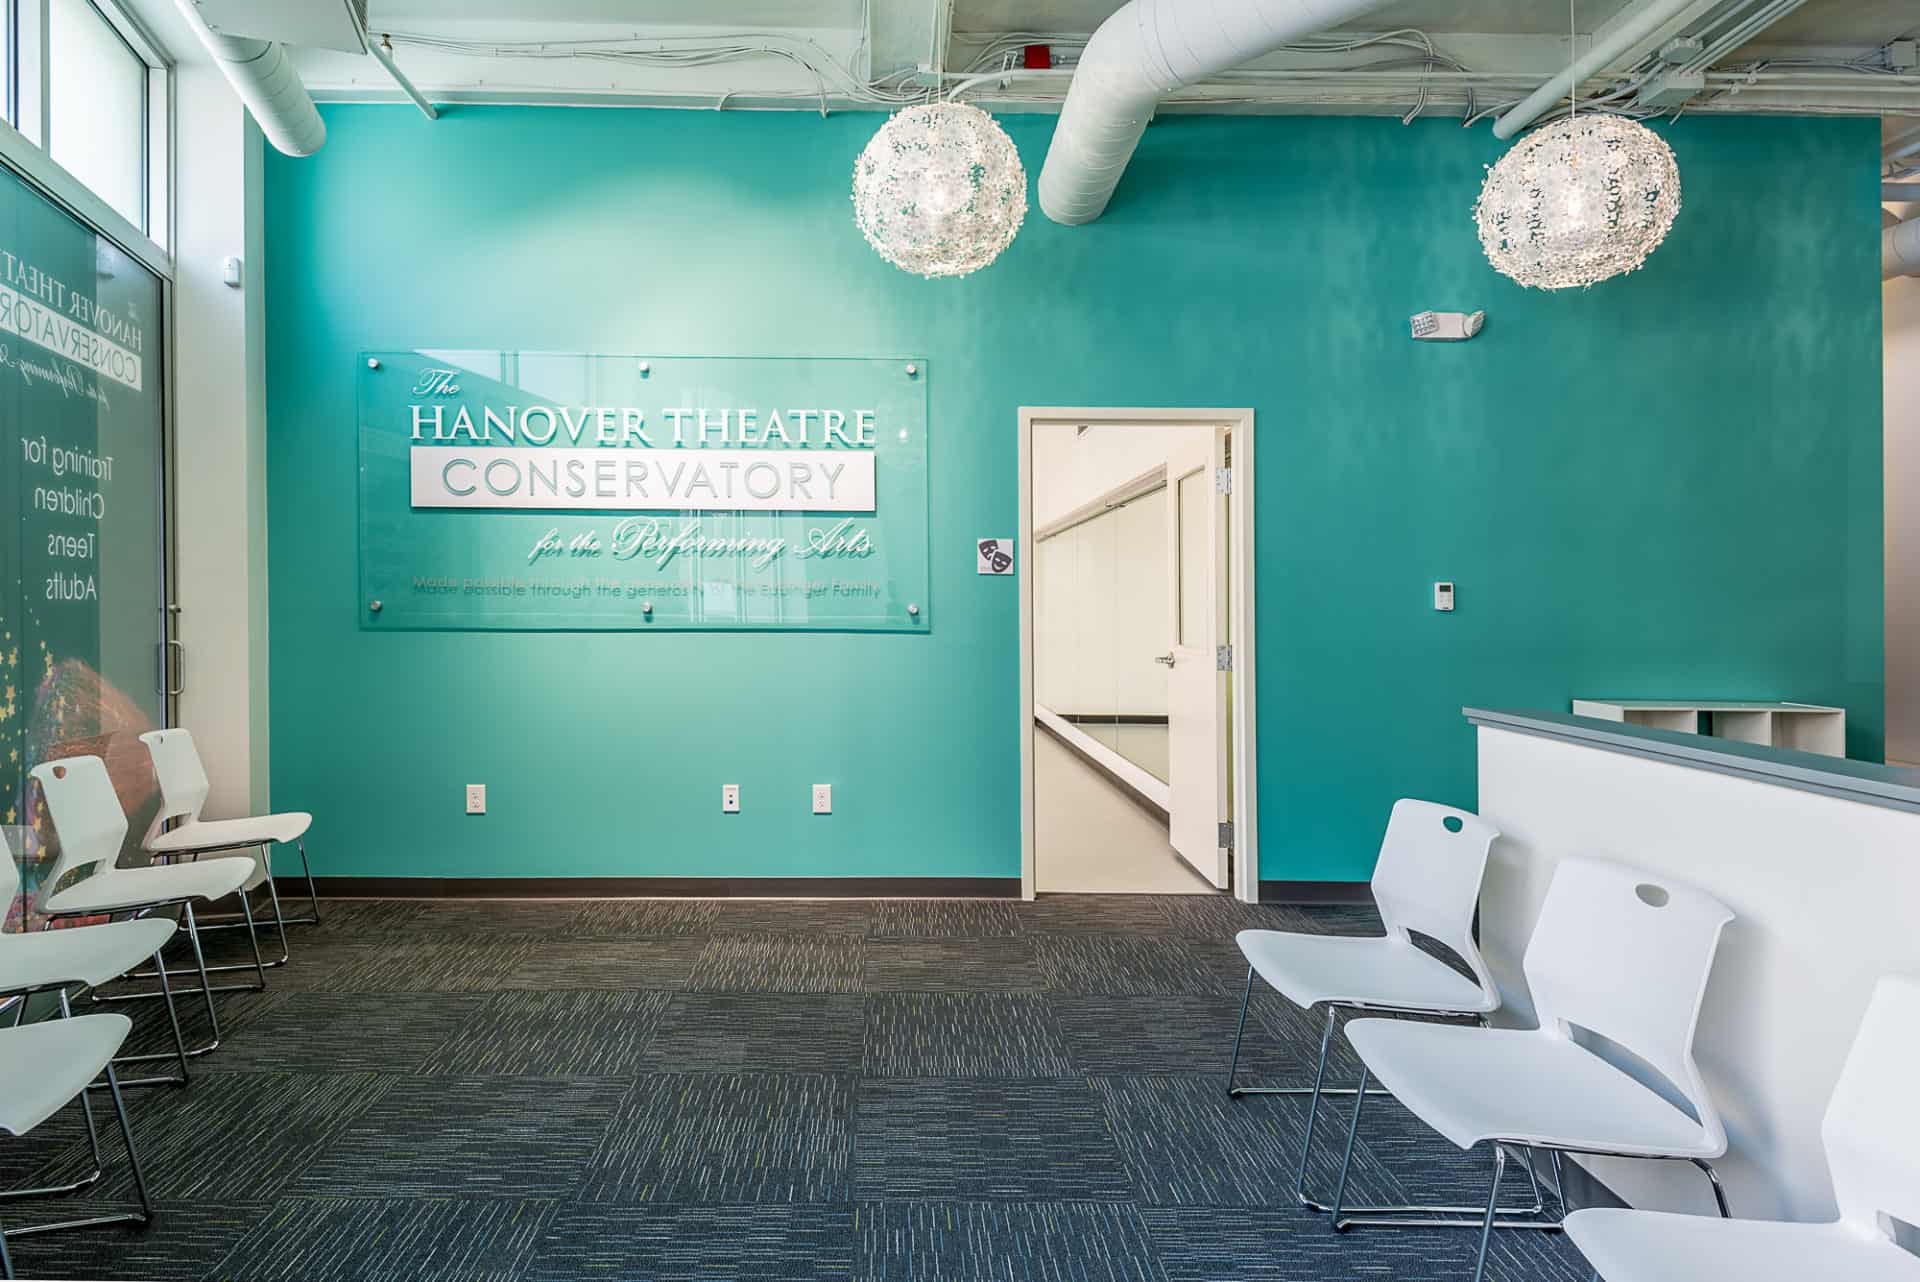 A glass sign that reads "The Hanover Theatre Conservatory for the Performing Arts" hanging on a blue wall, a studio can be seen in the background, chairs line the wall on the right side of the room